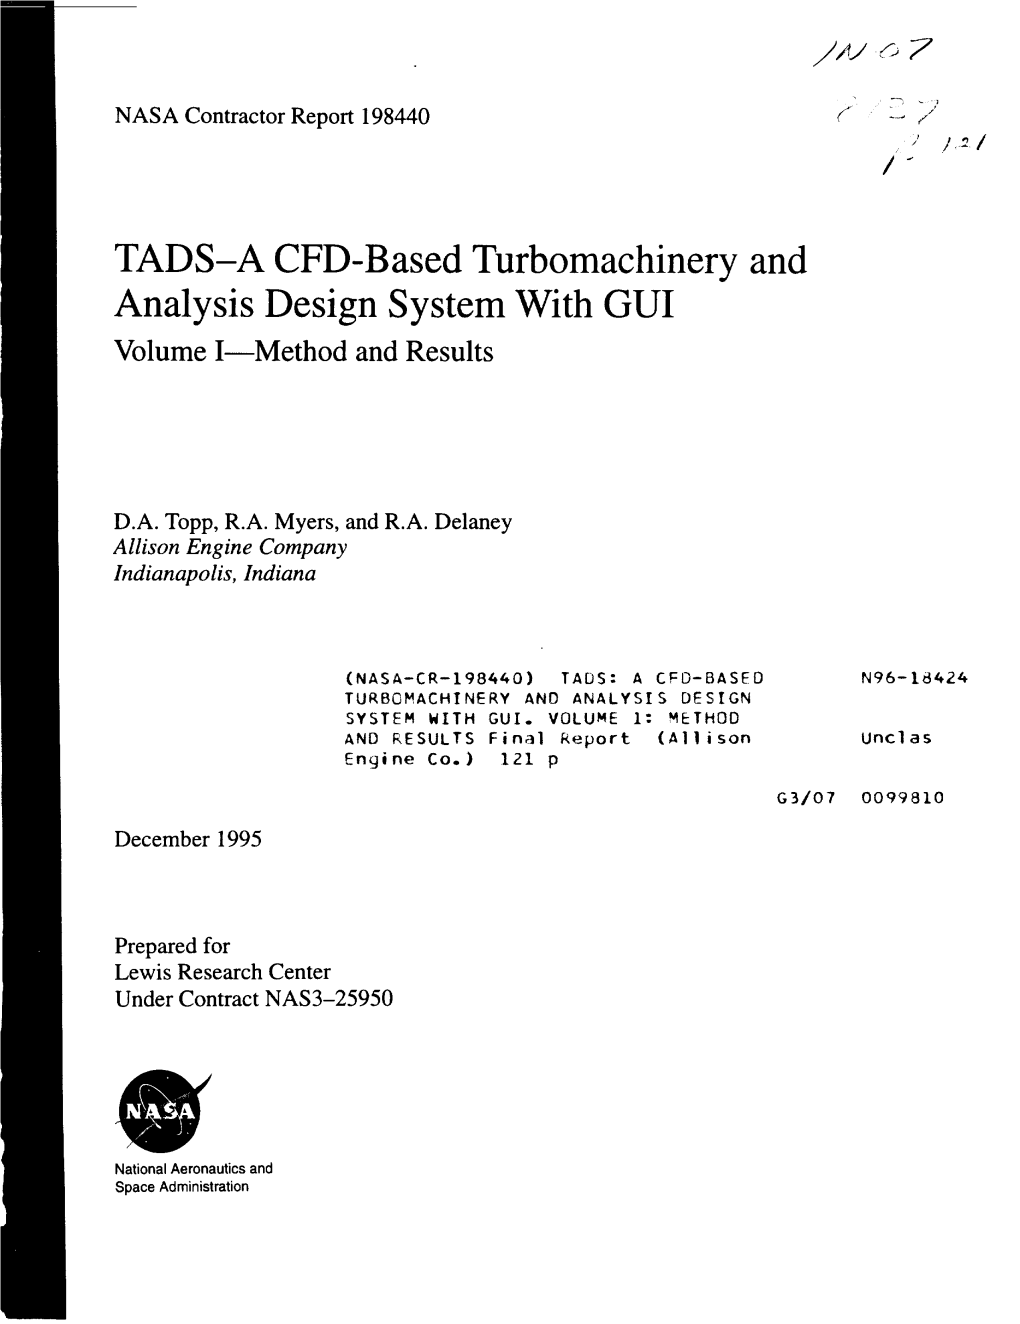 TADS-A CFD-Based Turbomachinery and Analysis Design System with GUI Volume I--Method and Results